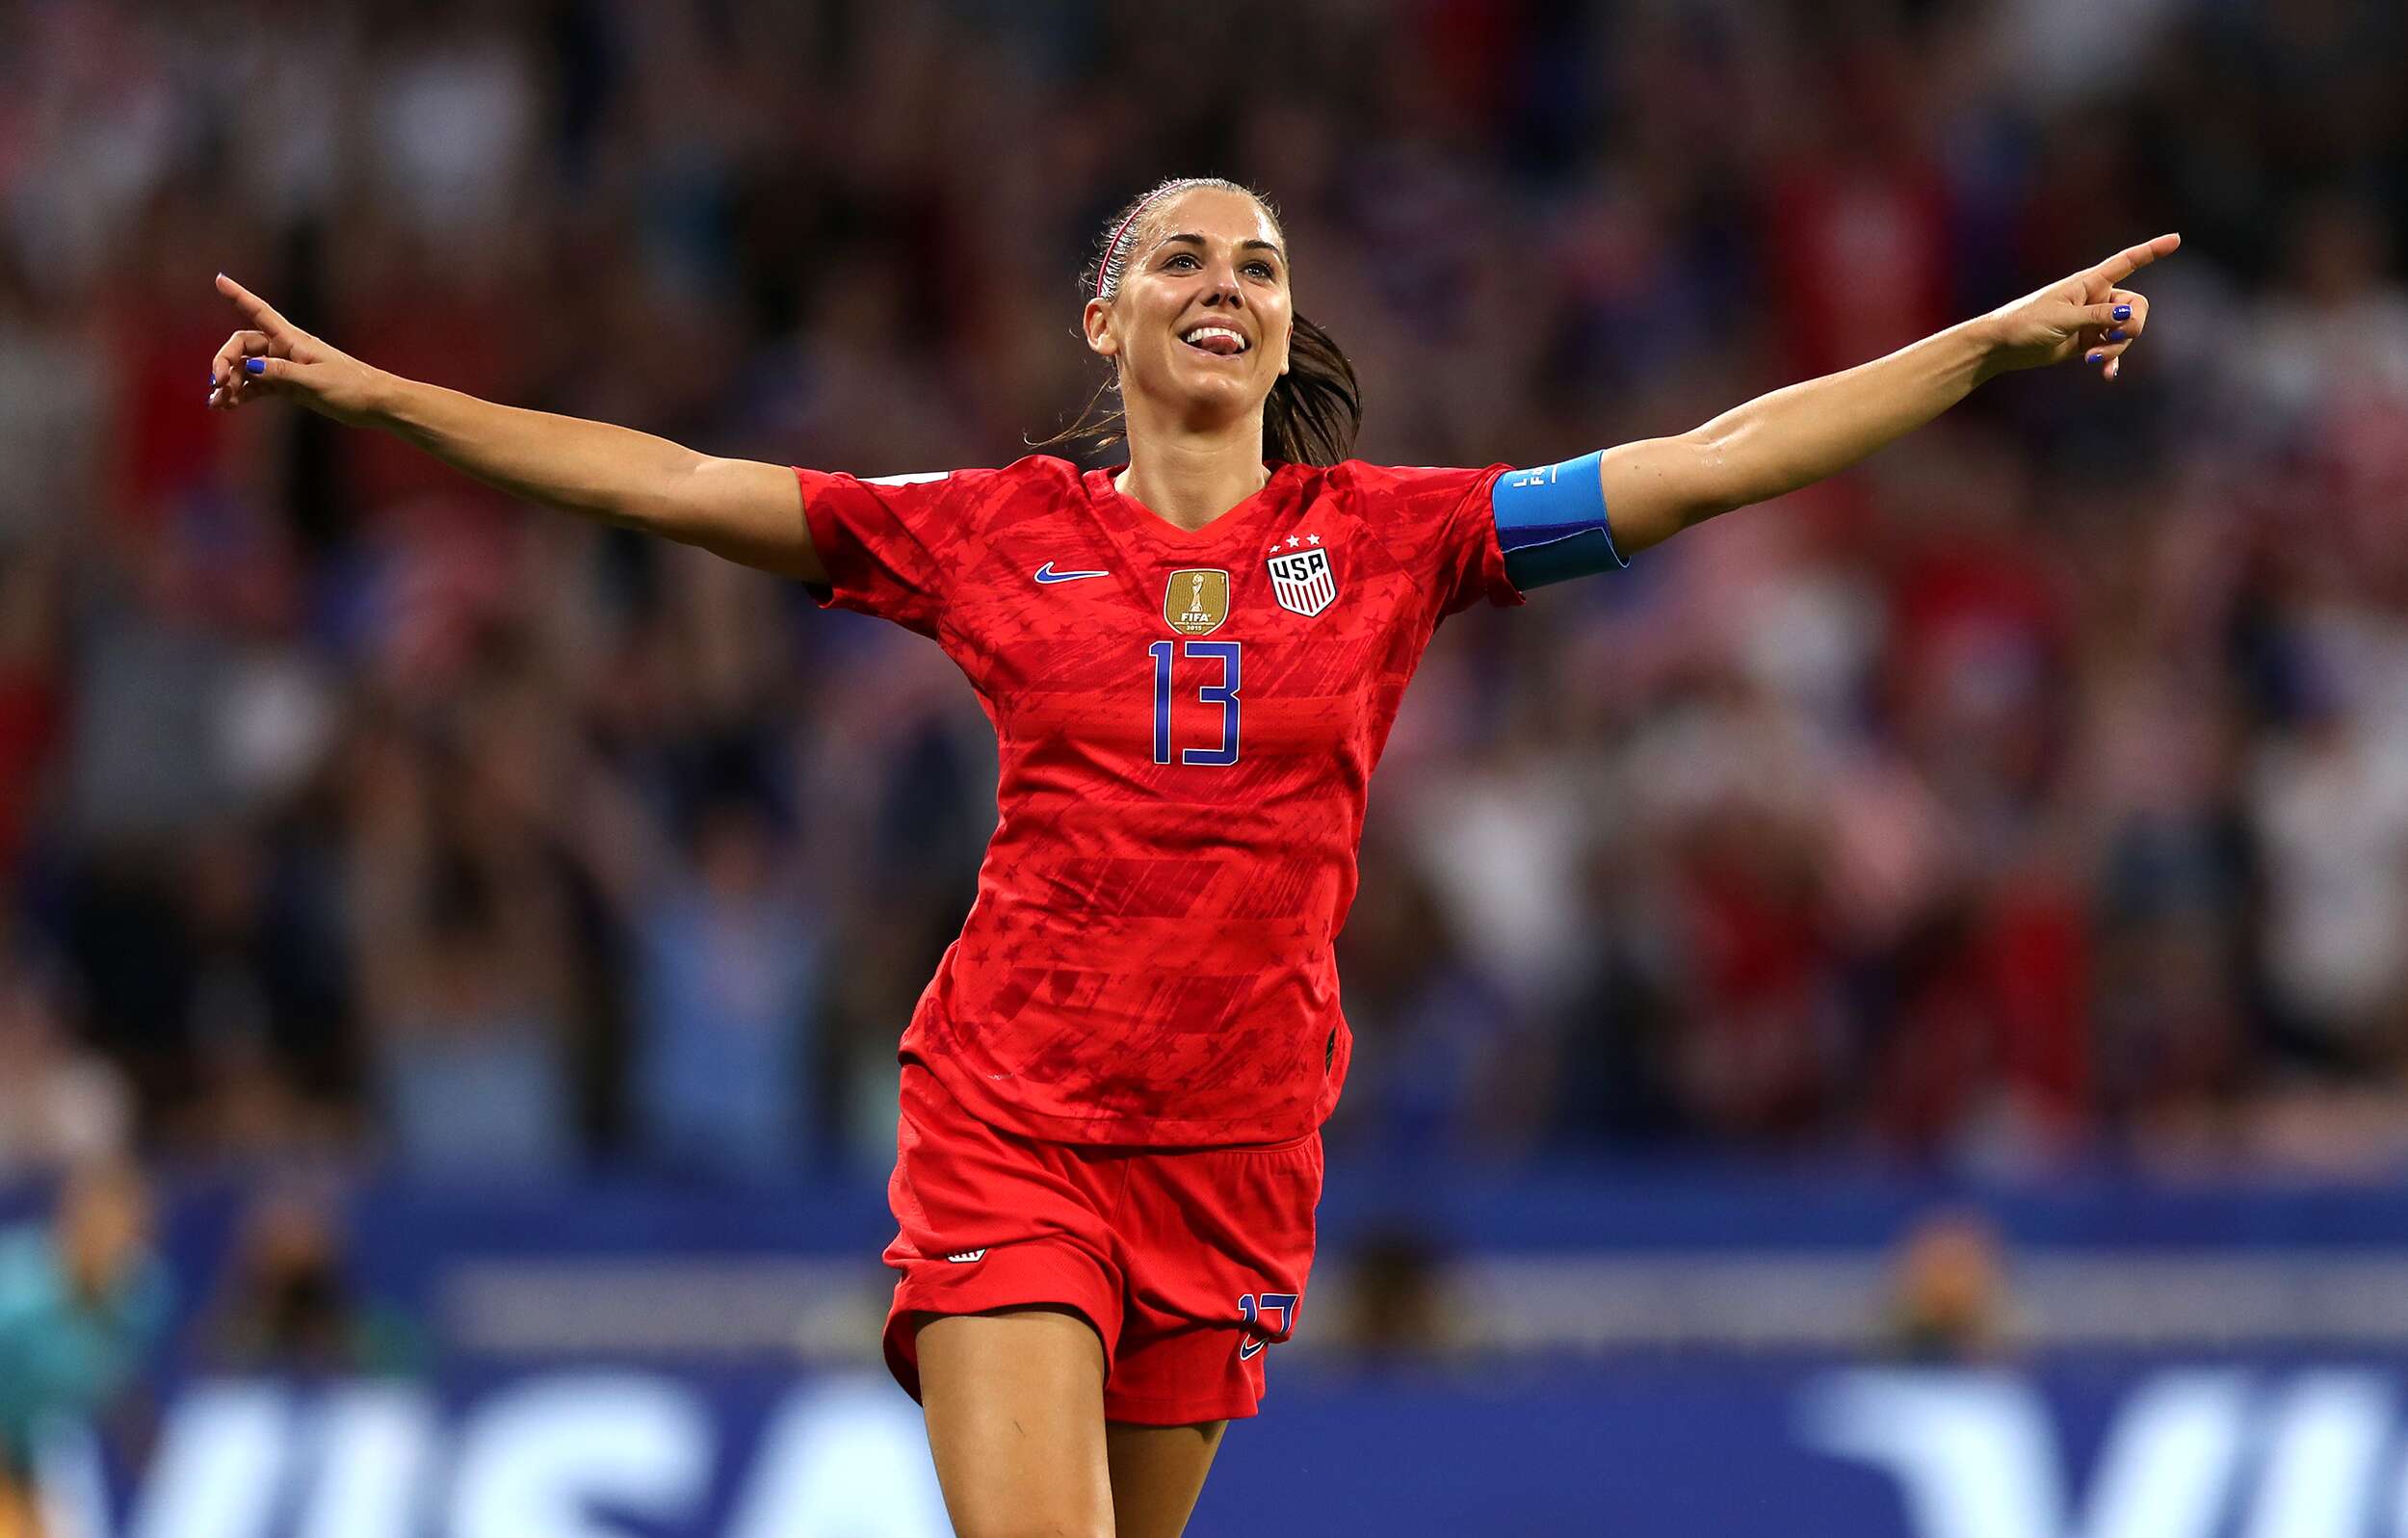 Top 7 Hottest Female Soccer Players and Pictures In 2022